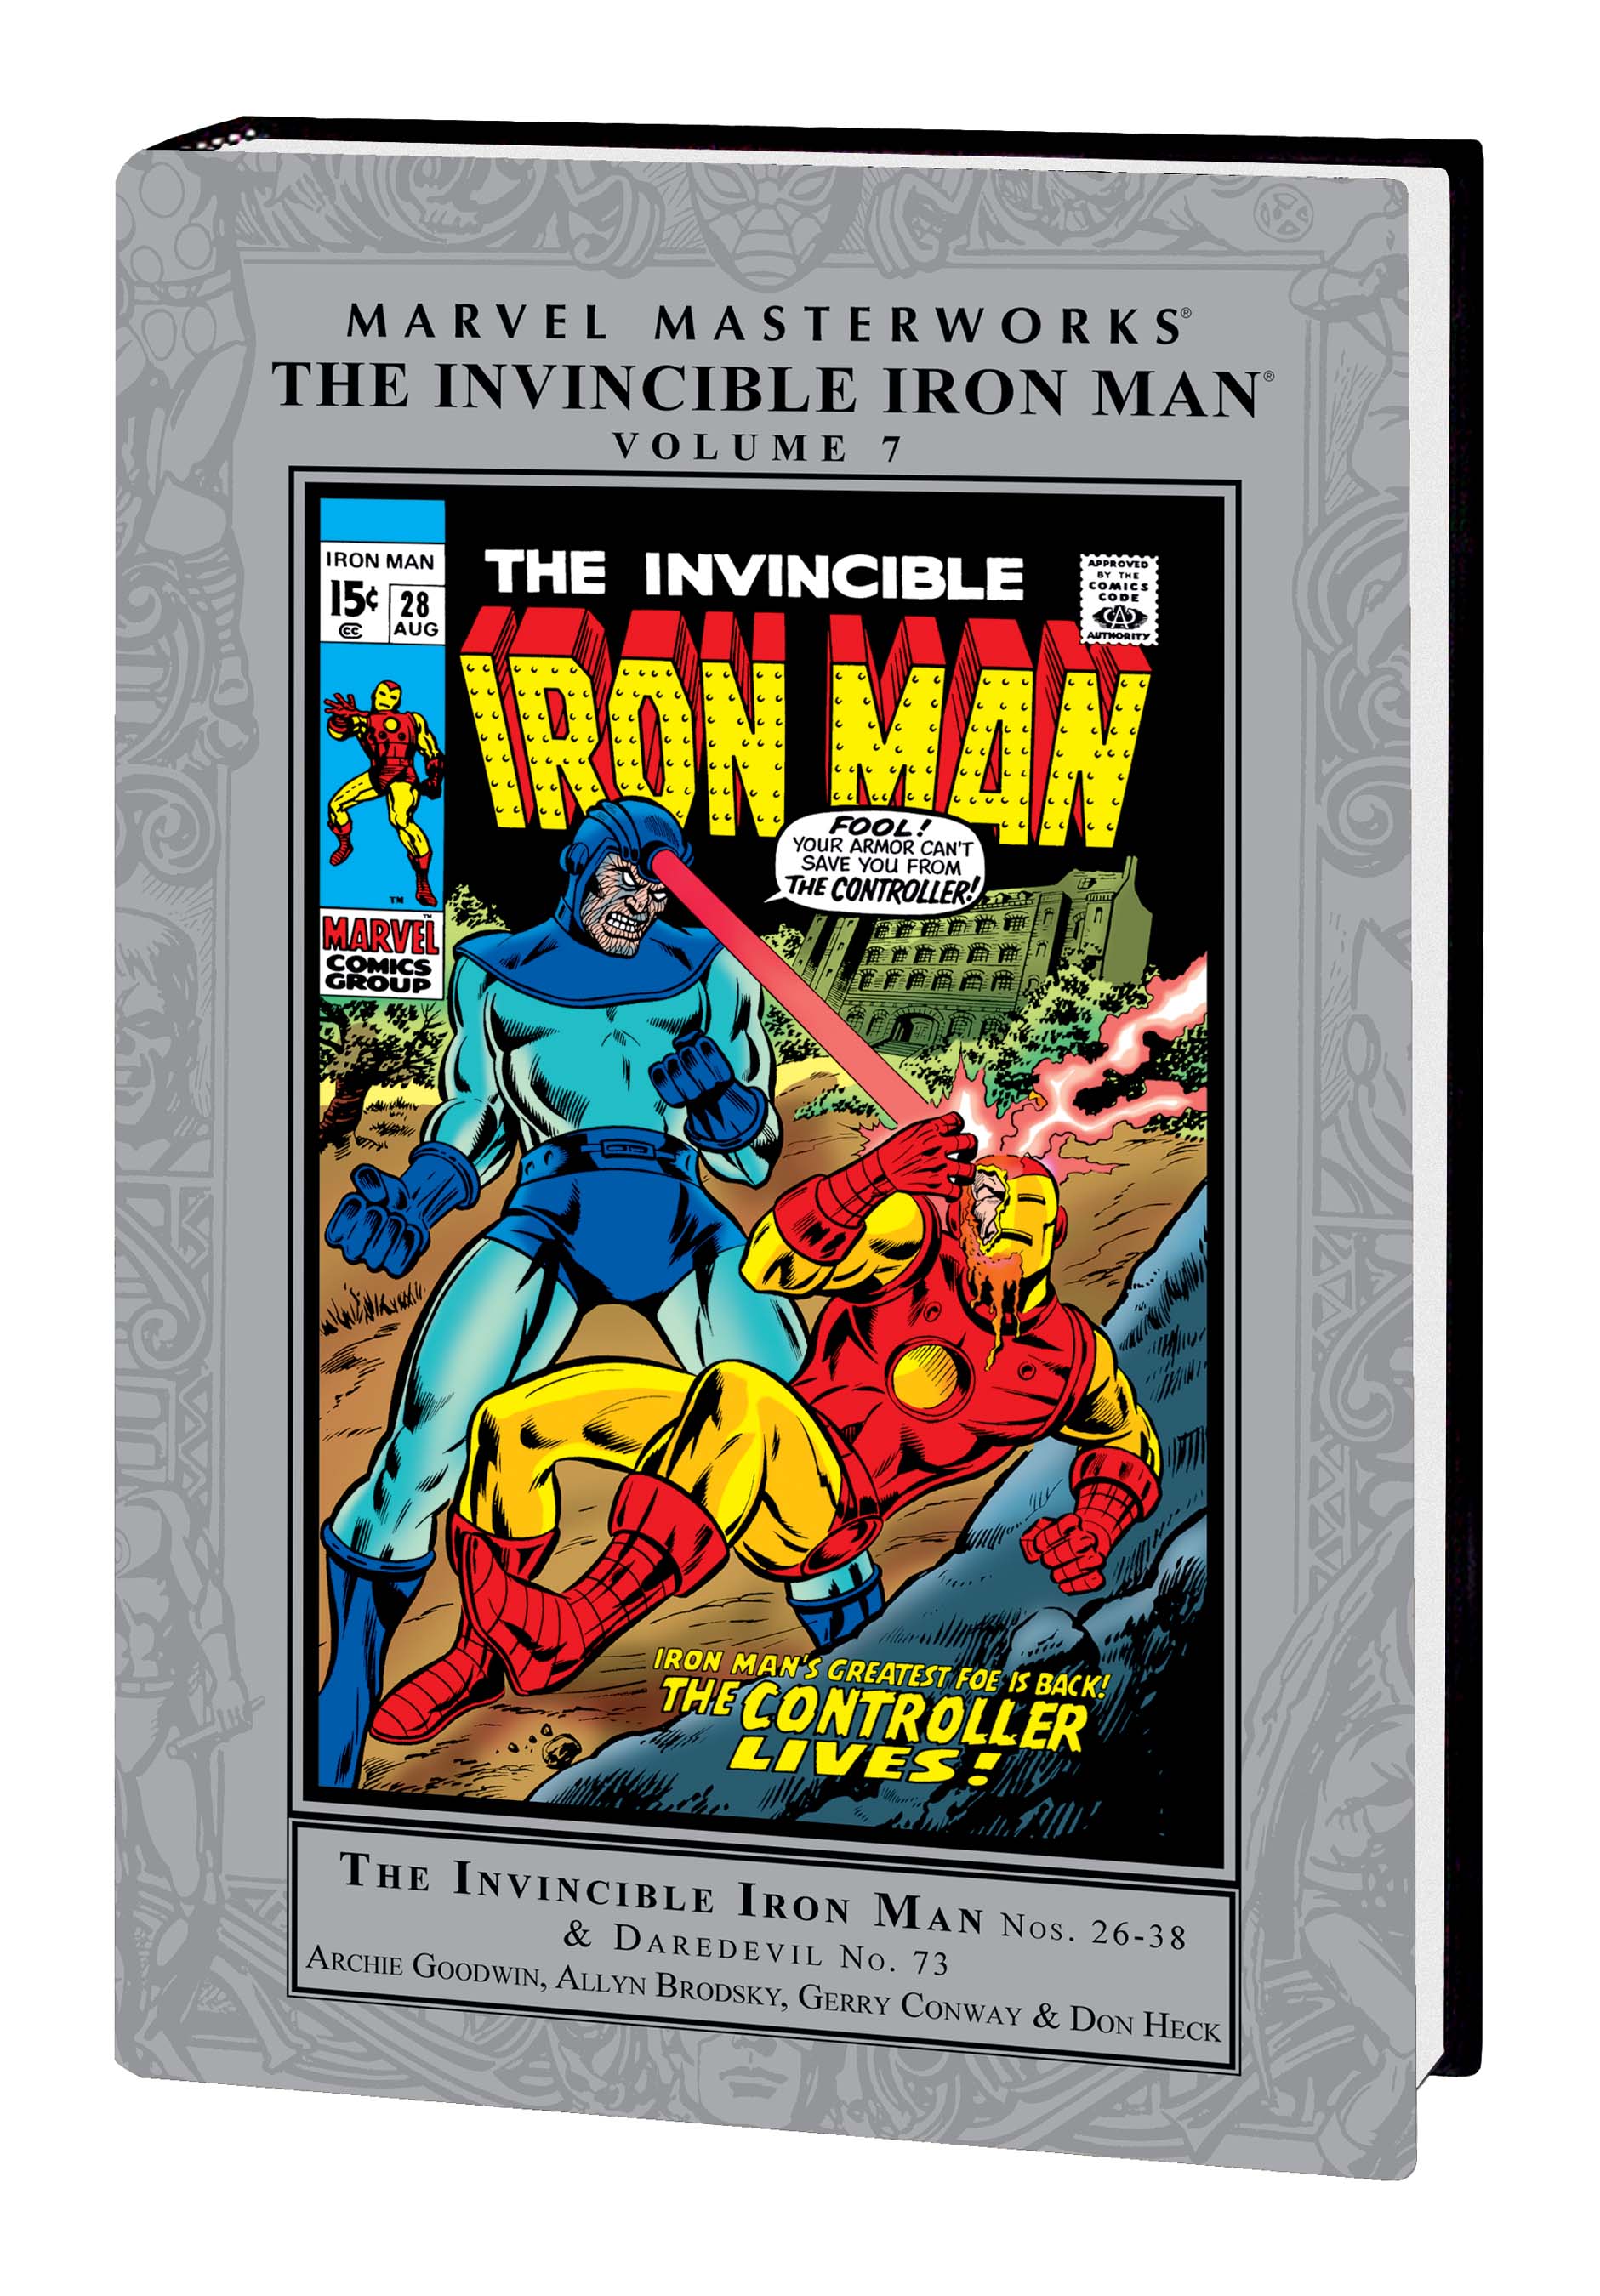 Marvel Masterworks: The Invincible Iron Man (Hardcover)